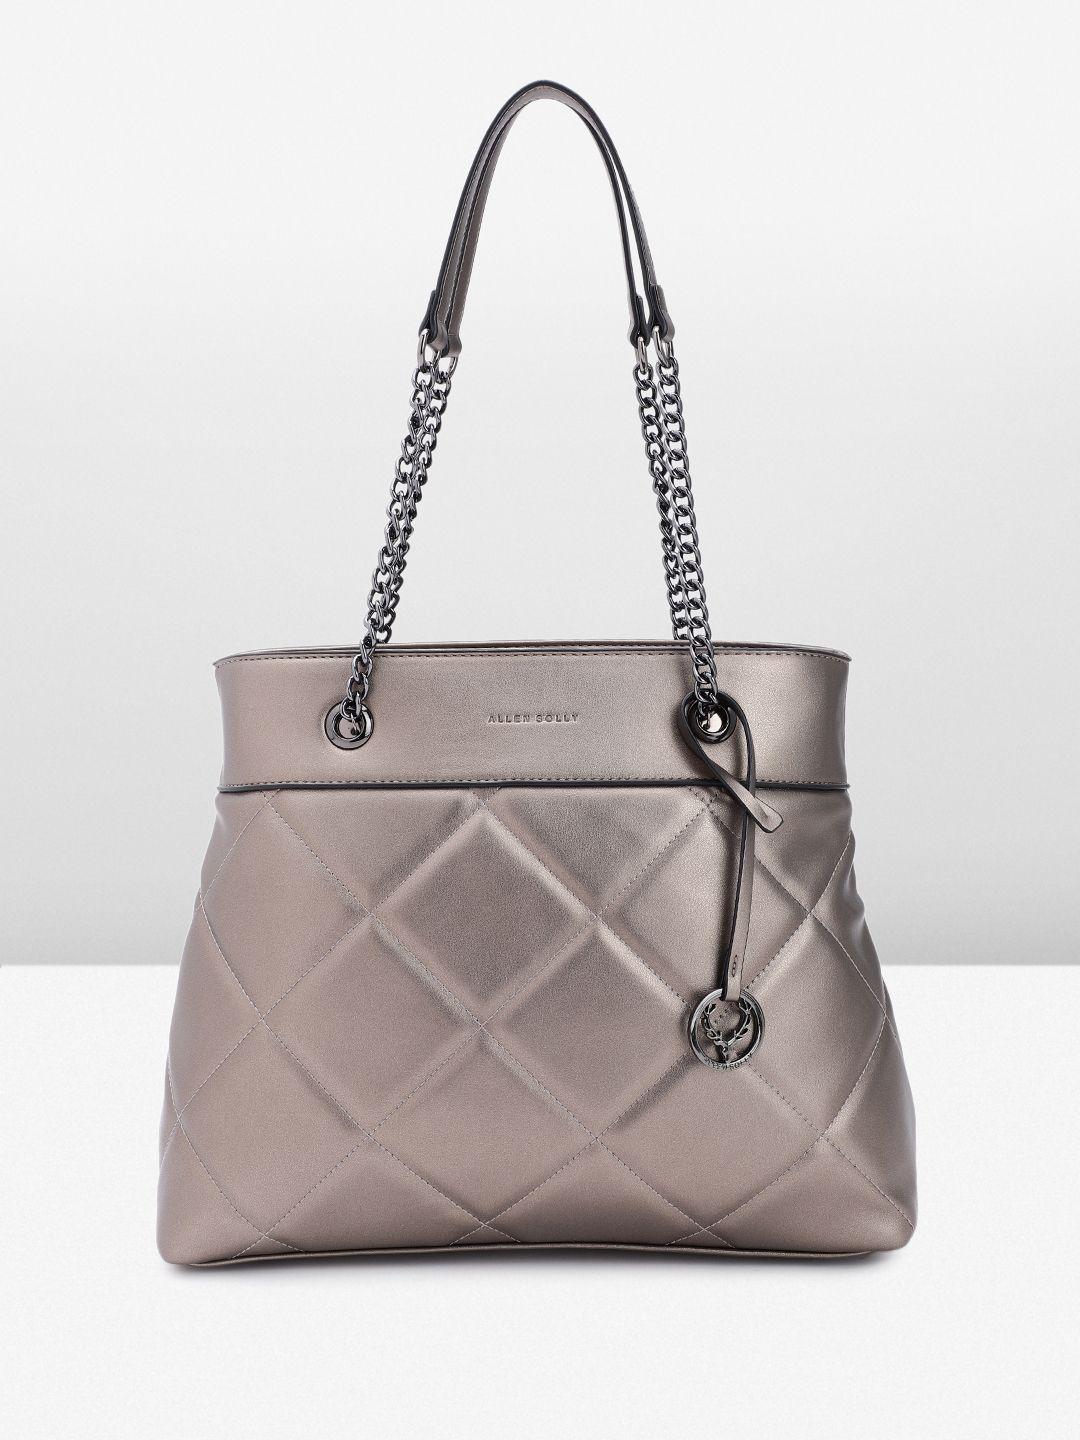 allen solly geometric self design structured shoulder bag with quilted & tasselled detail